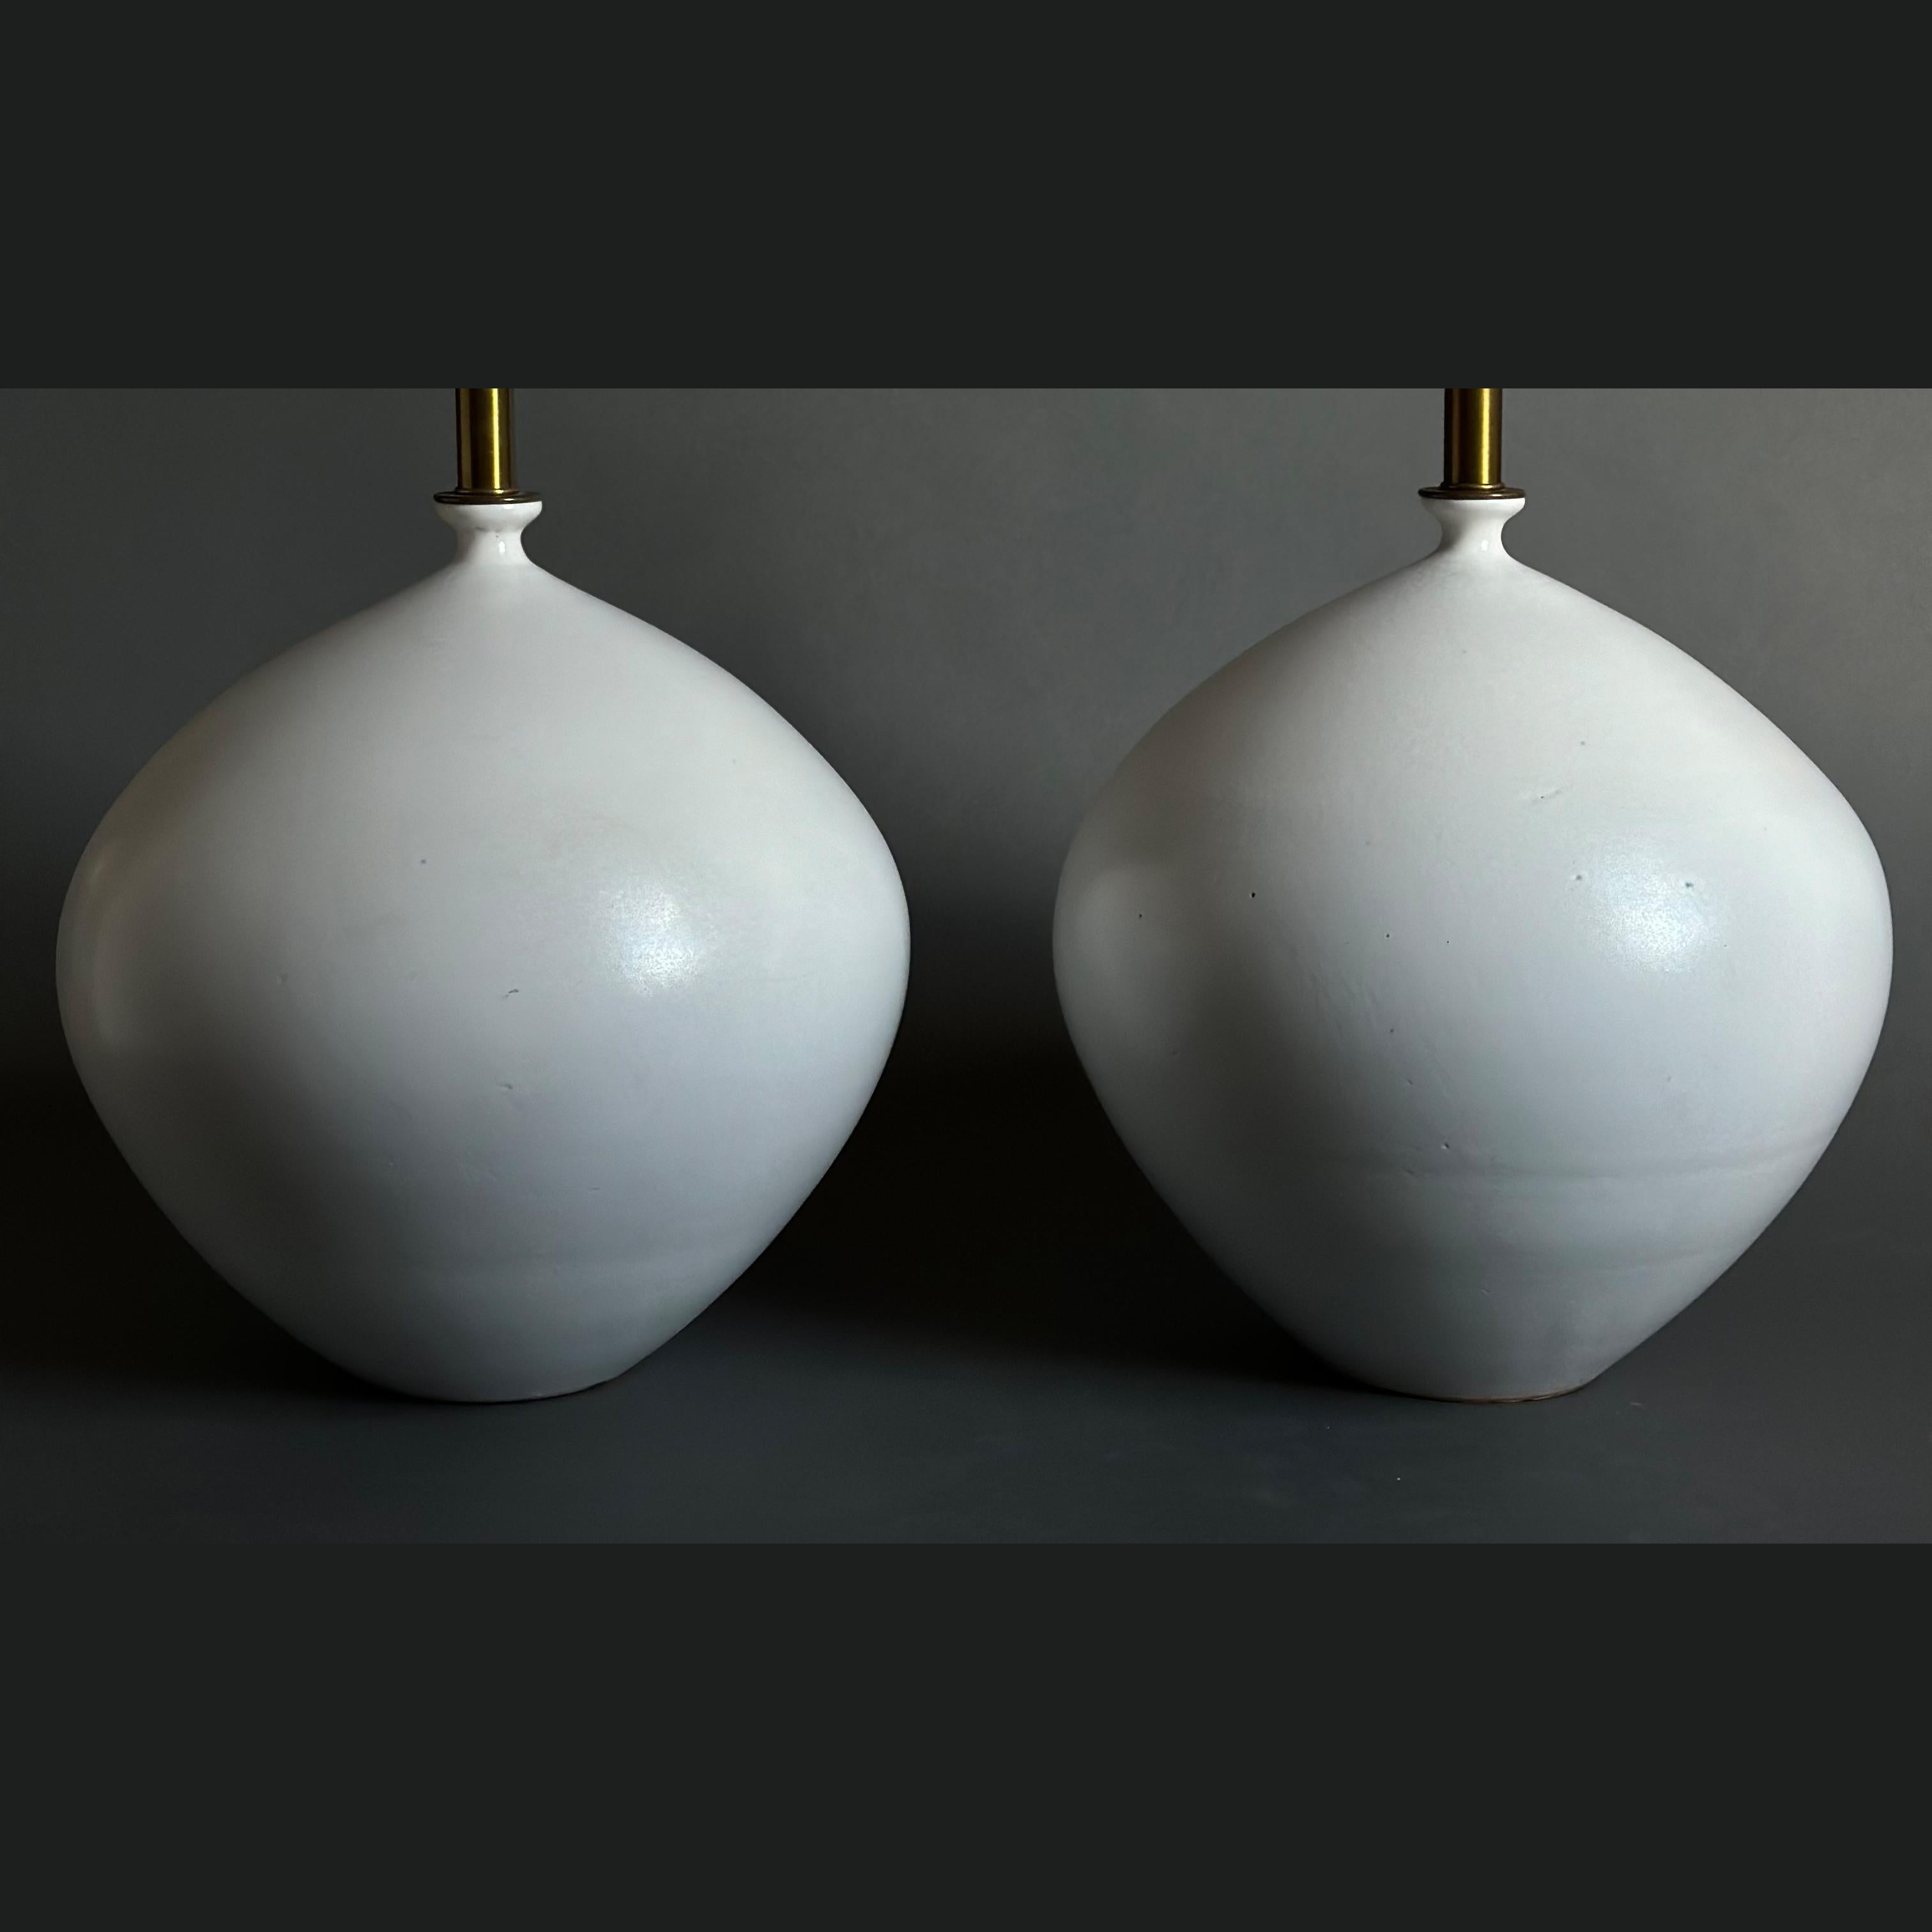 Mid-20th Century Pair of Large Scale Ceramic Table Lamps in Milk White Glaze by Design Technics For Sale